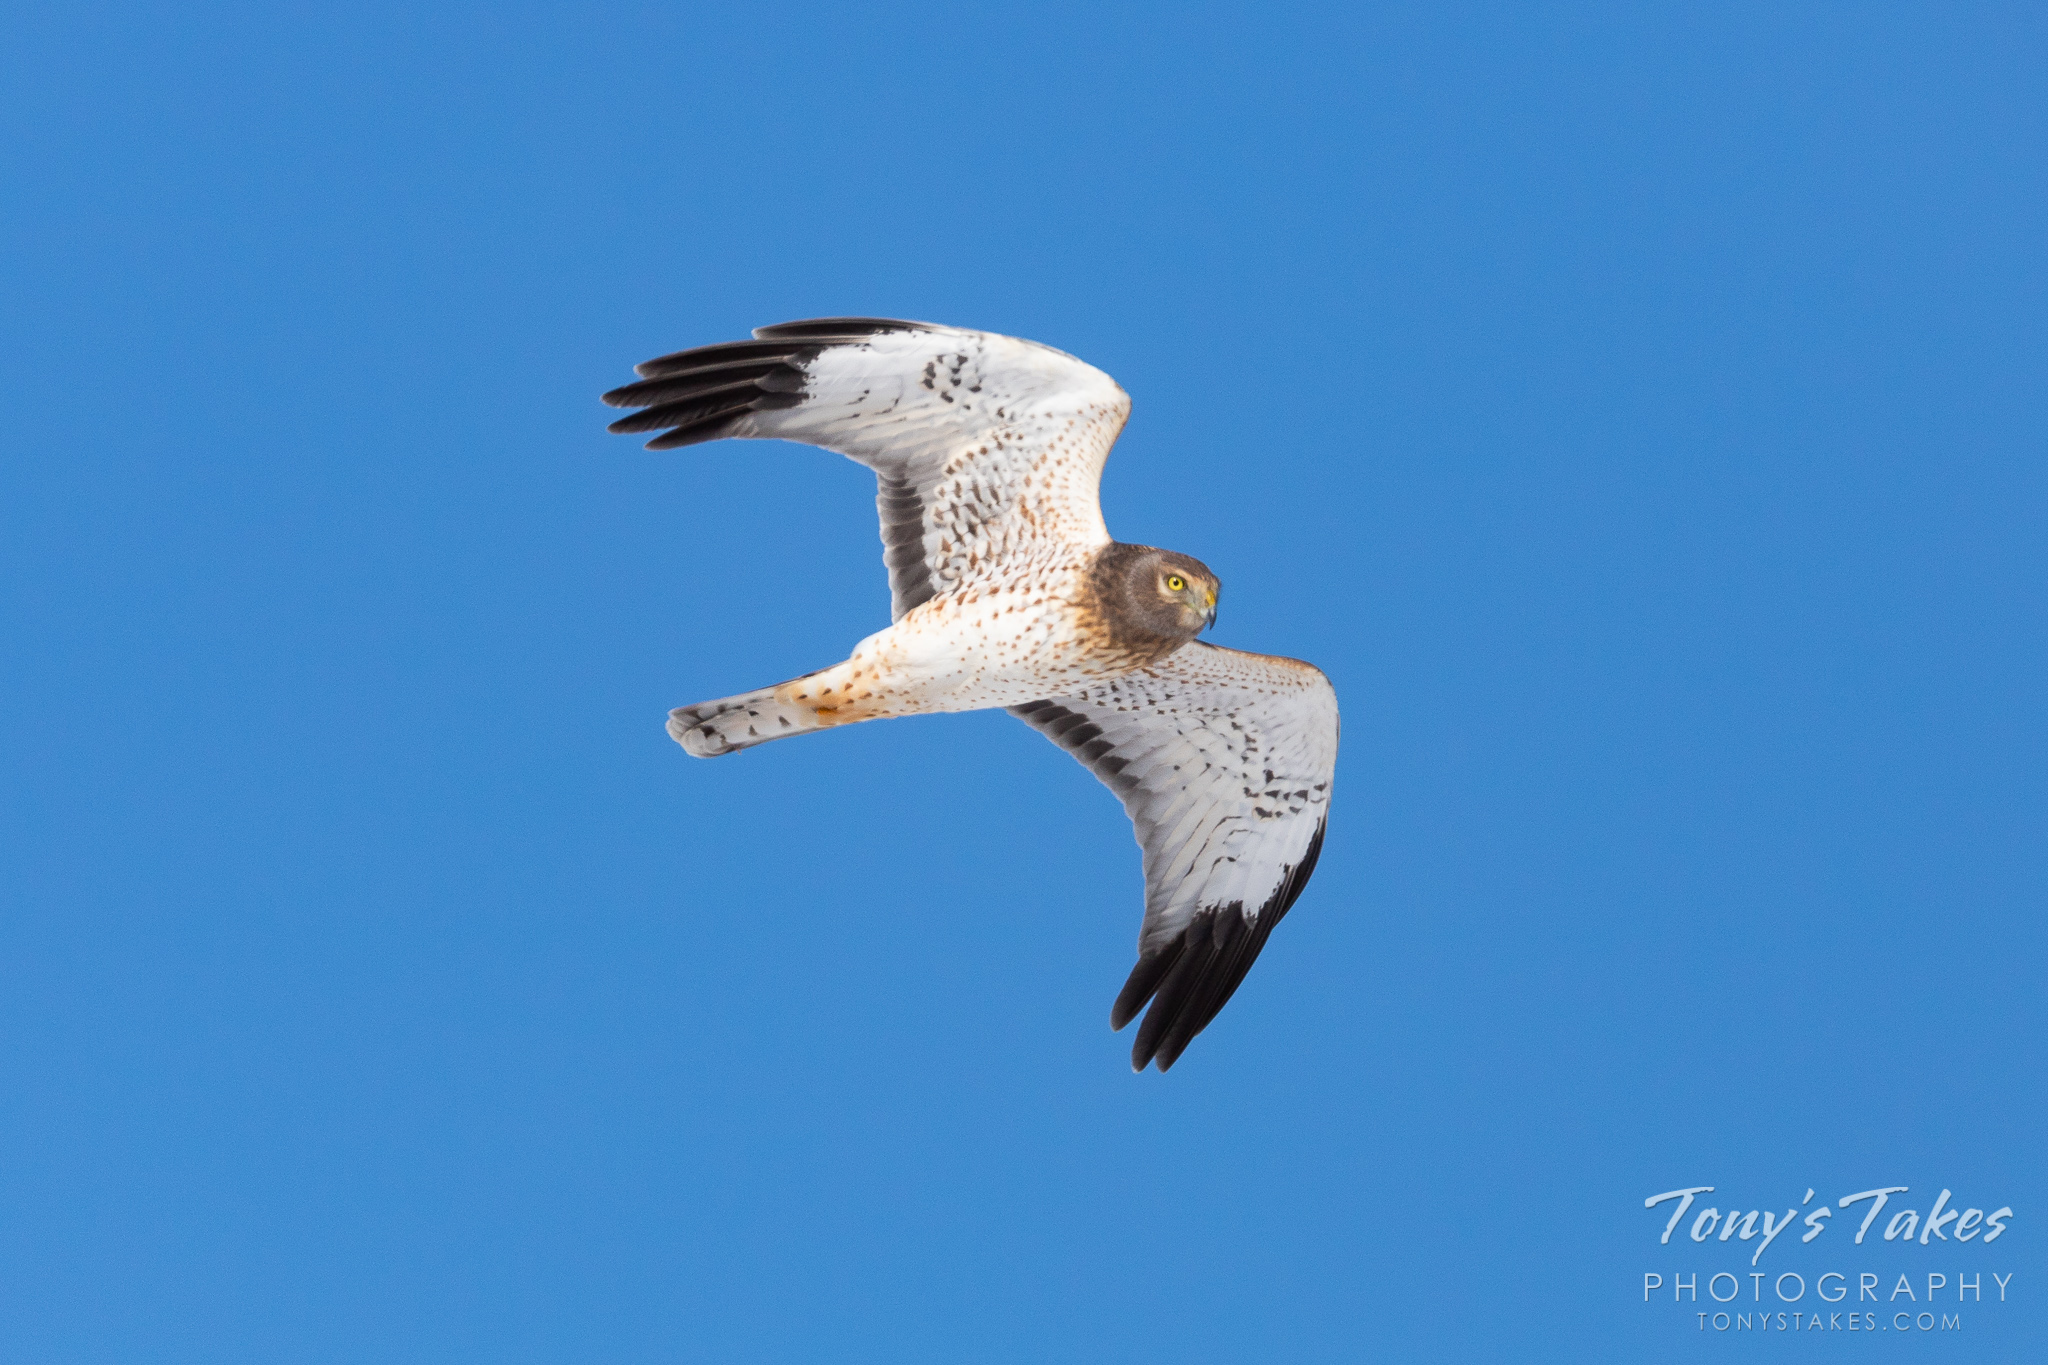 A young male Northern Harrier performs a flyby in Adams County, Colorado. (© Tony’s Takes)